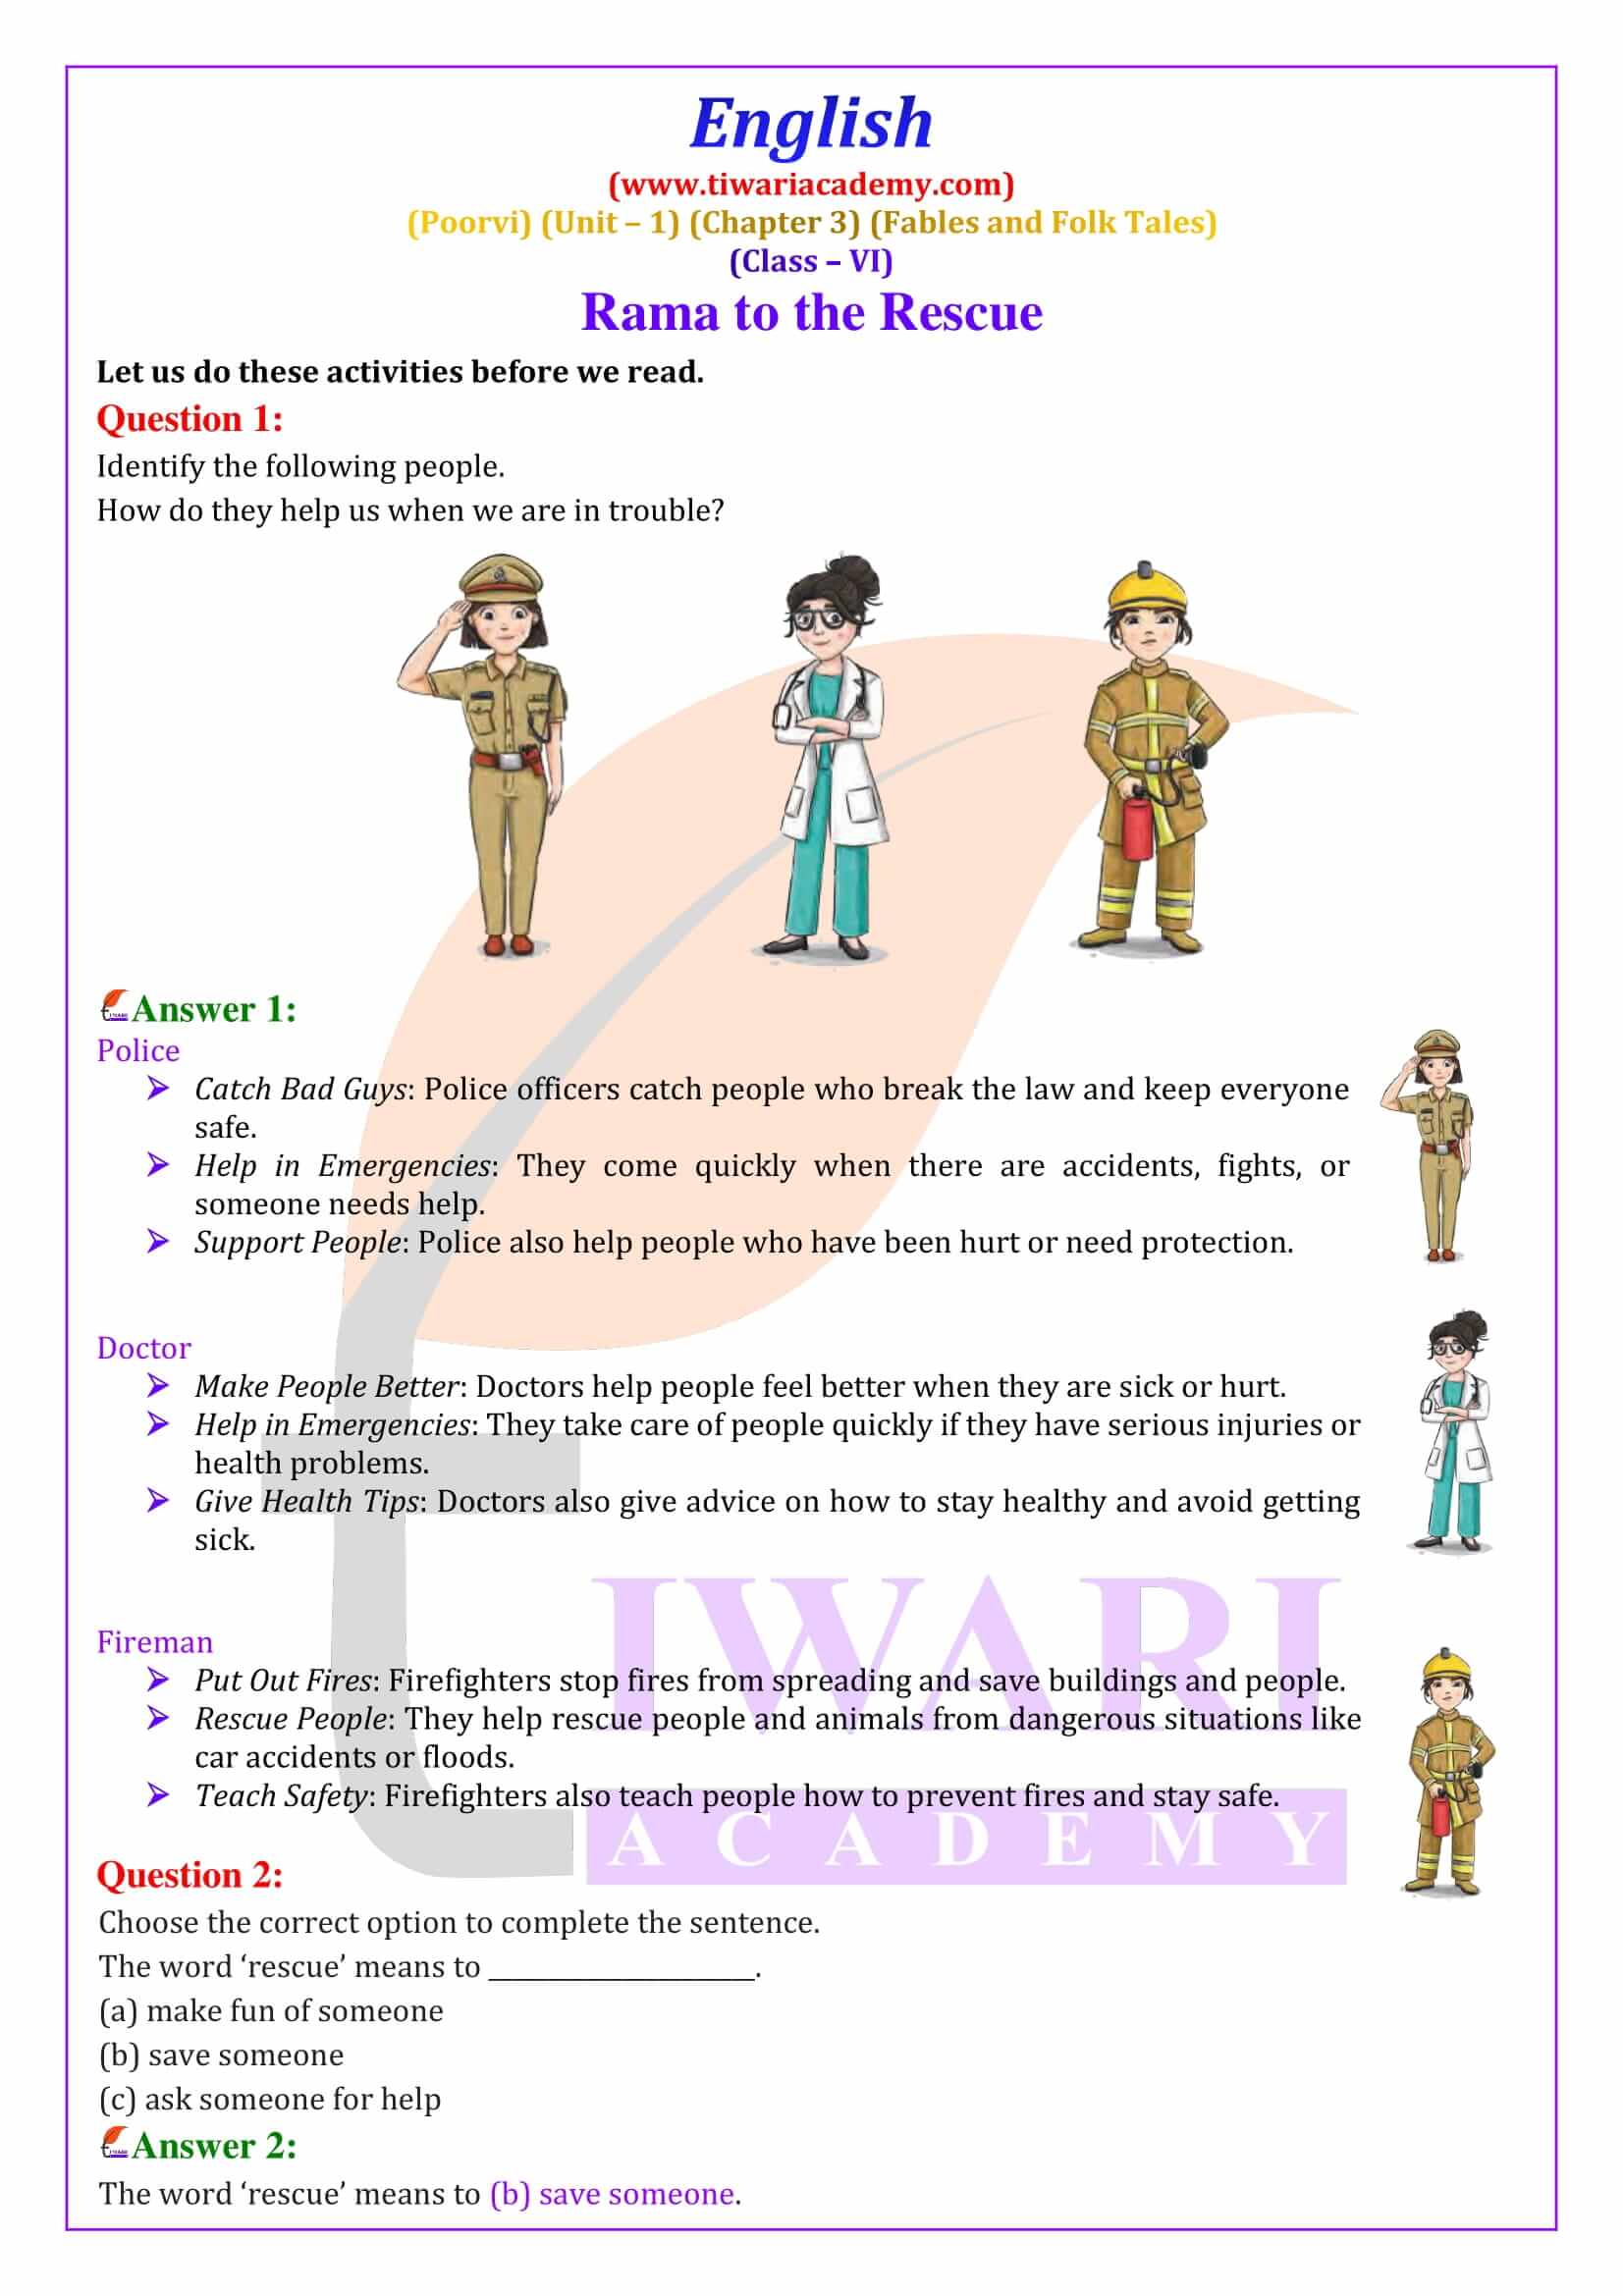 NCERT Solutions for Class 6 English Poorvi Unit 1 Fables and Folk Tales Chapter 3 Rama to the Rescue